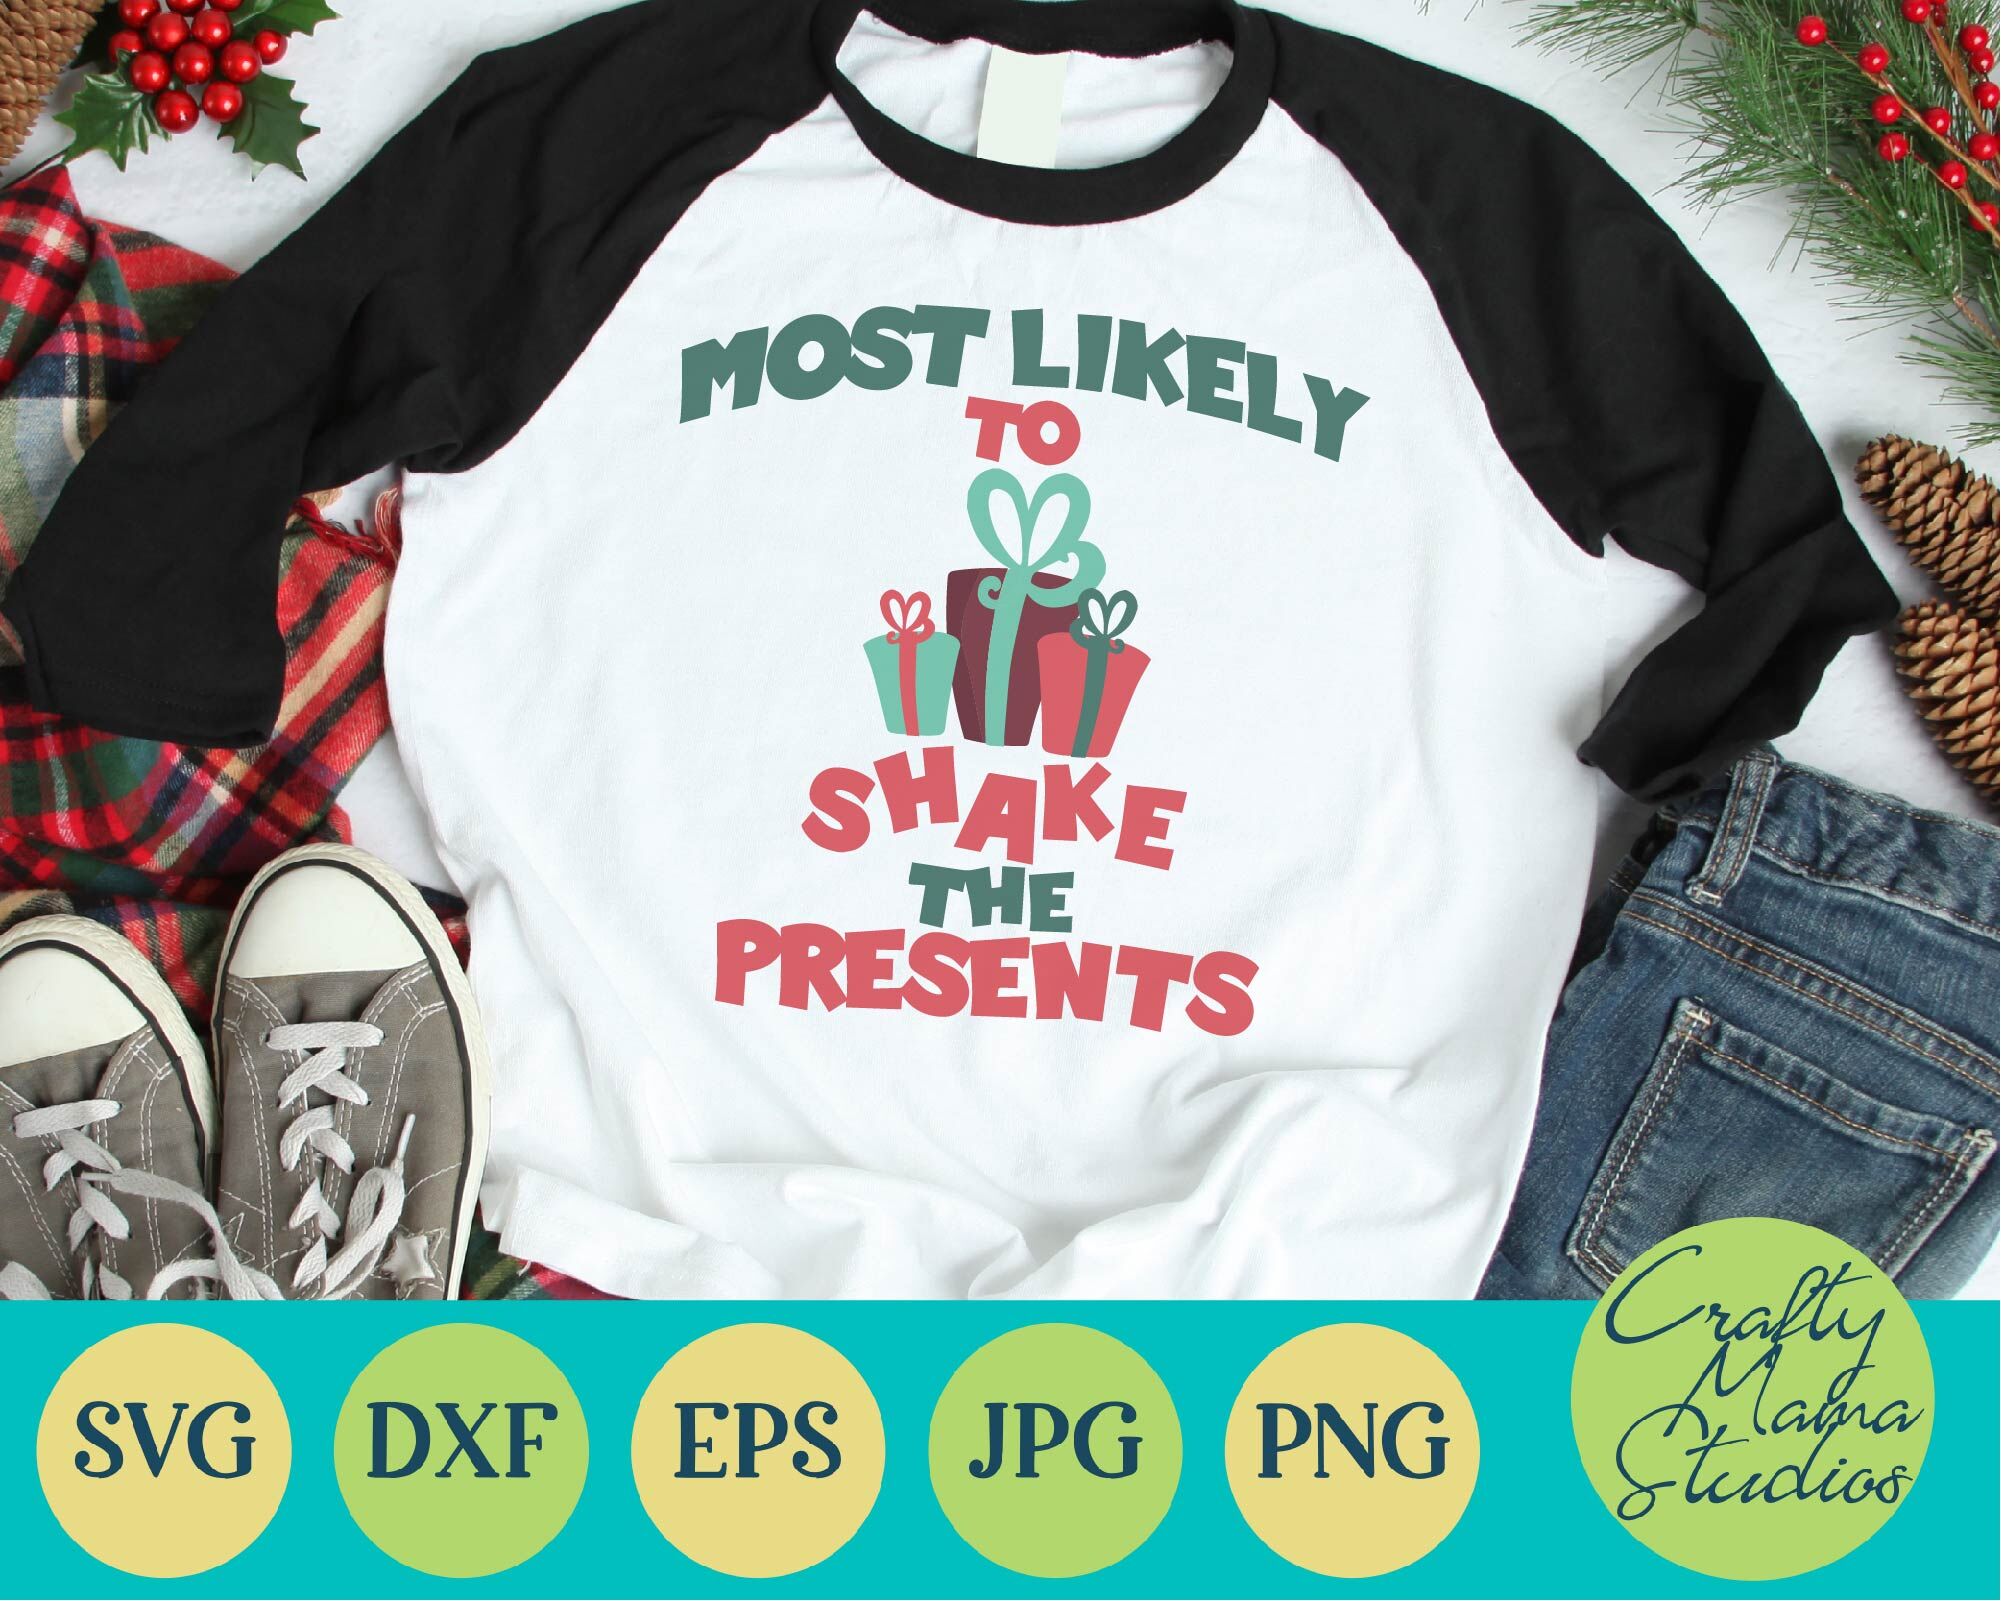 Christmas Svg Holiday Svg Most Likely To Shake The Presents File By Crafty Mama Studios Thehungryjpeg Com